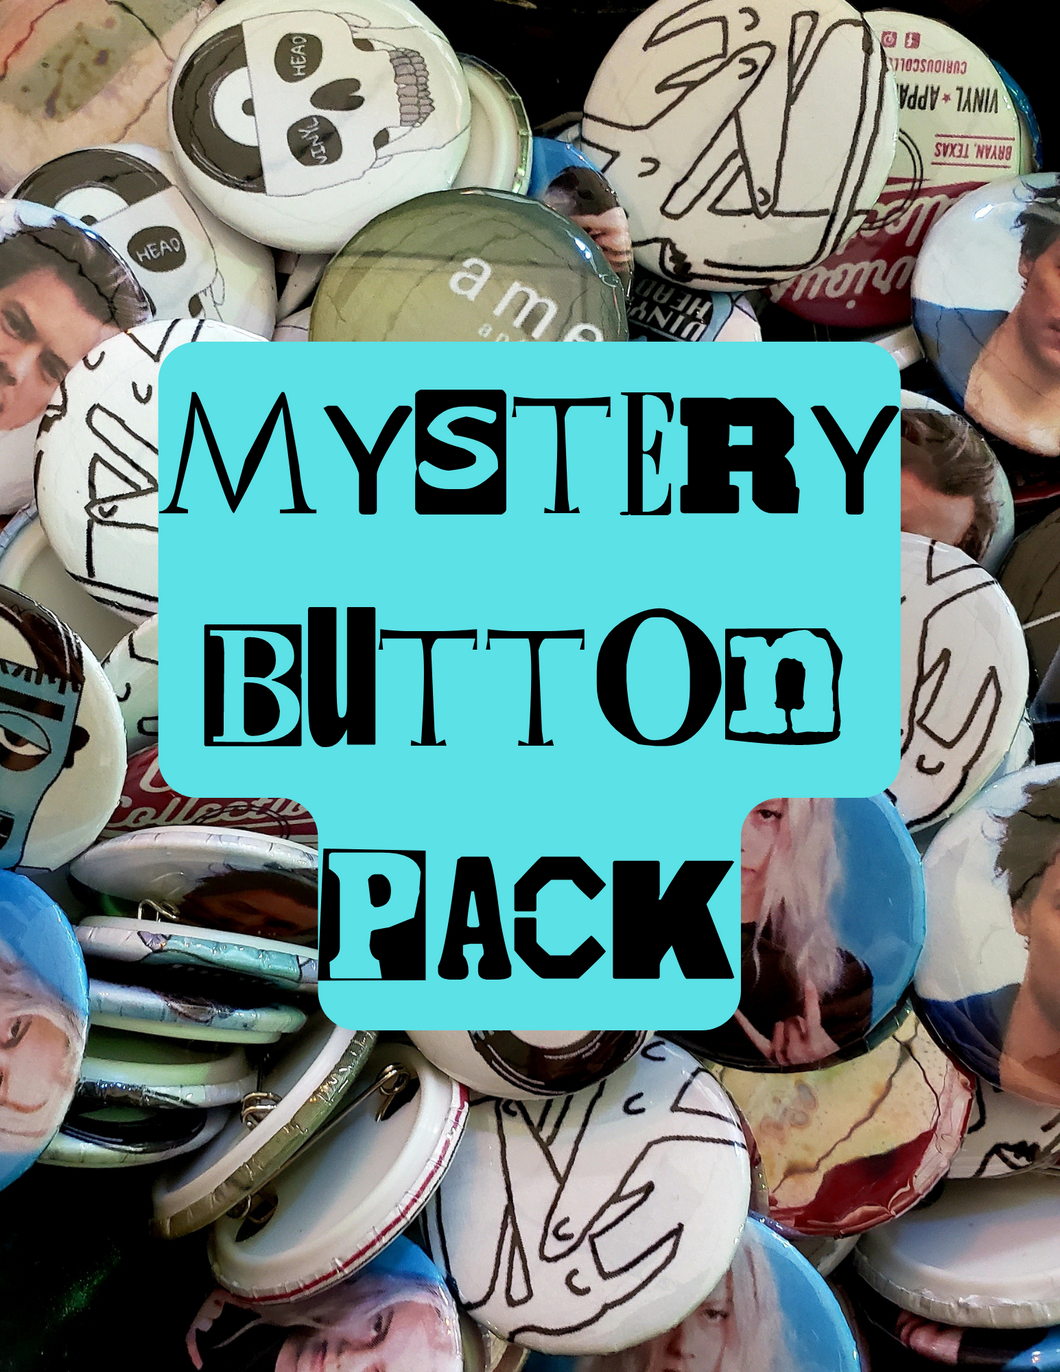 Mystery Button Pack